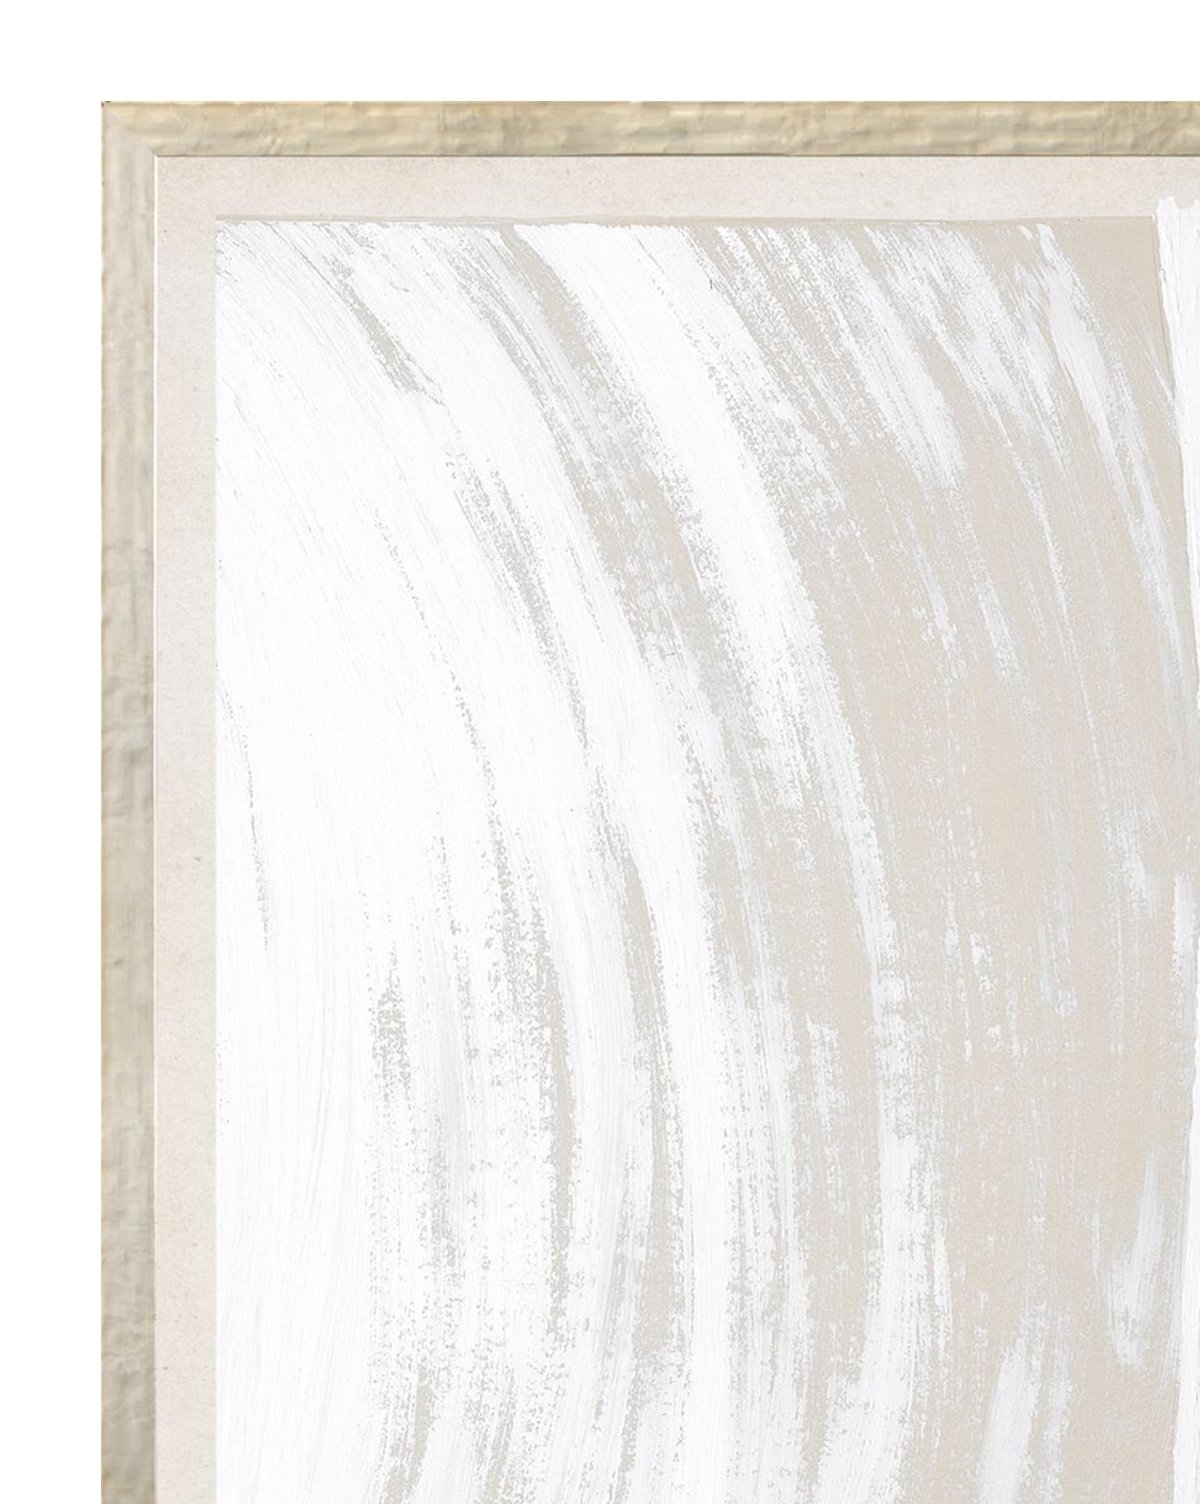 BEIGE ABSTRACT 4 Framed Art - 25" W x 33" H - Image 1